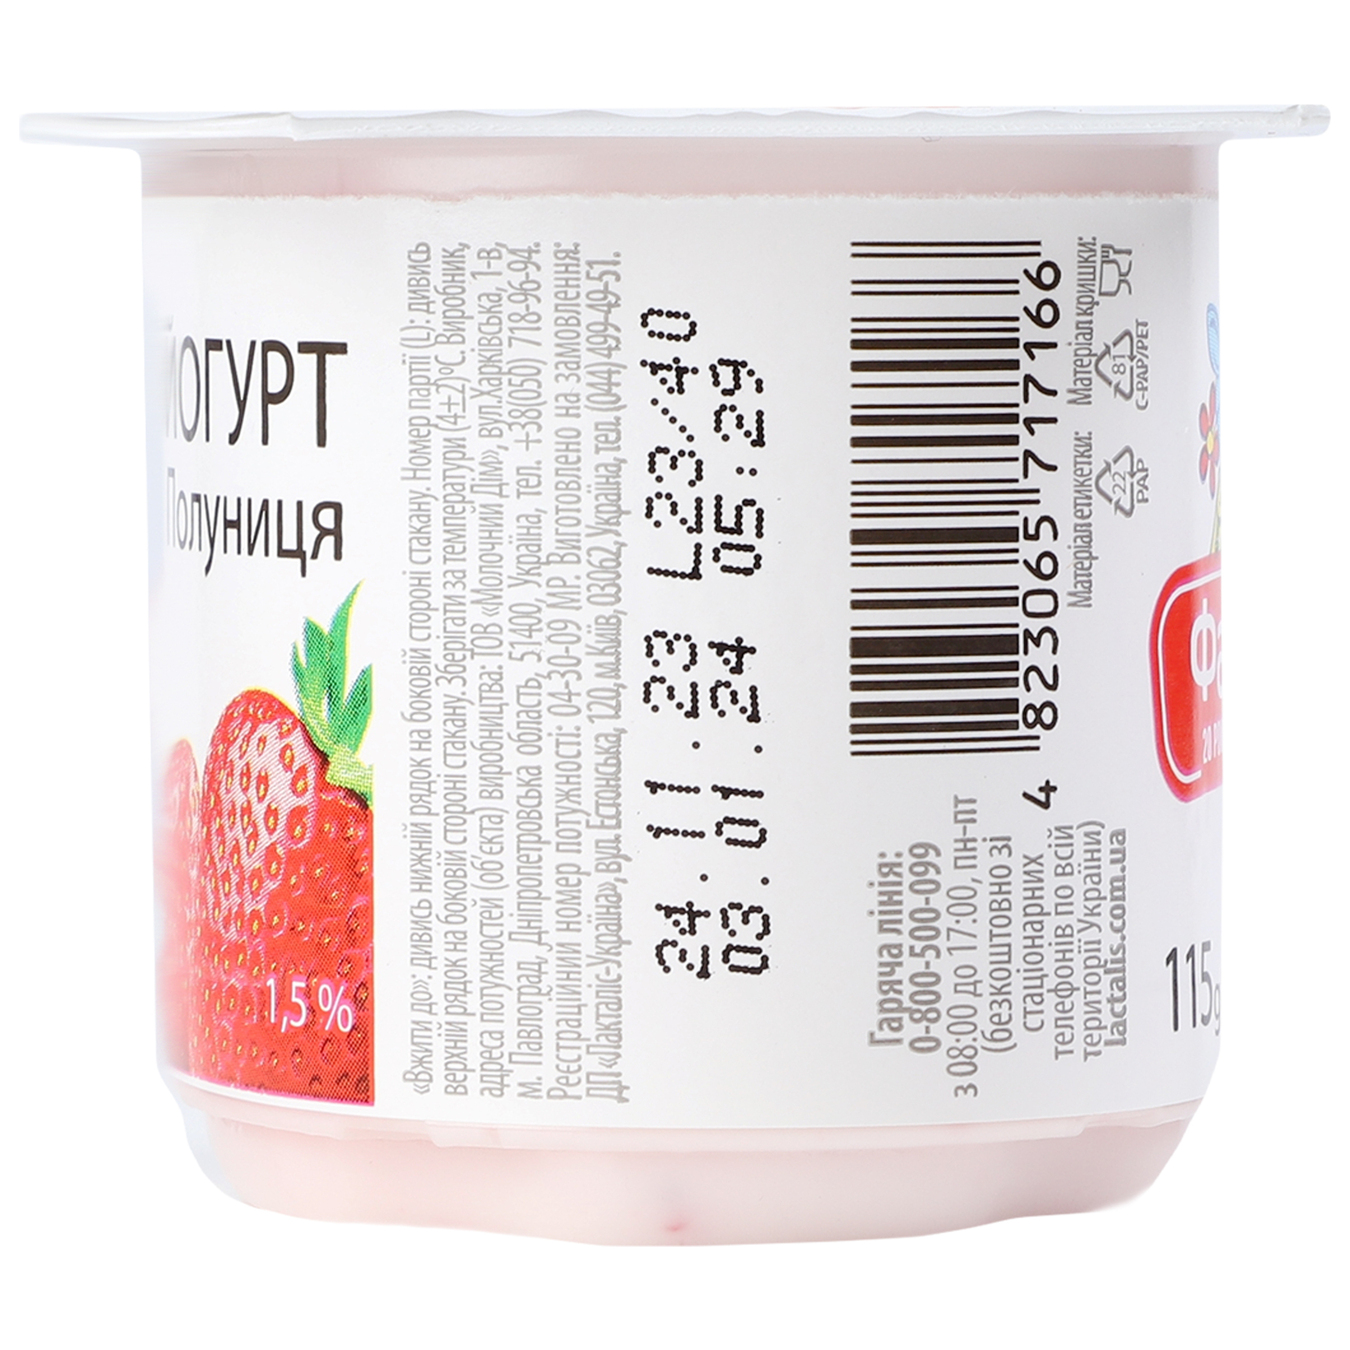 Fanny yogurt with strawberry filling cup 1.5% 115g 4